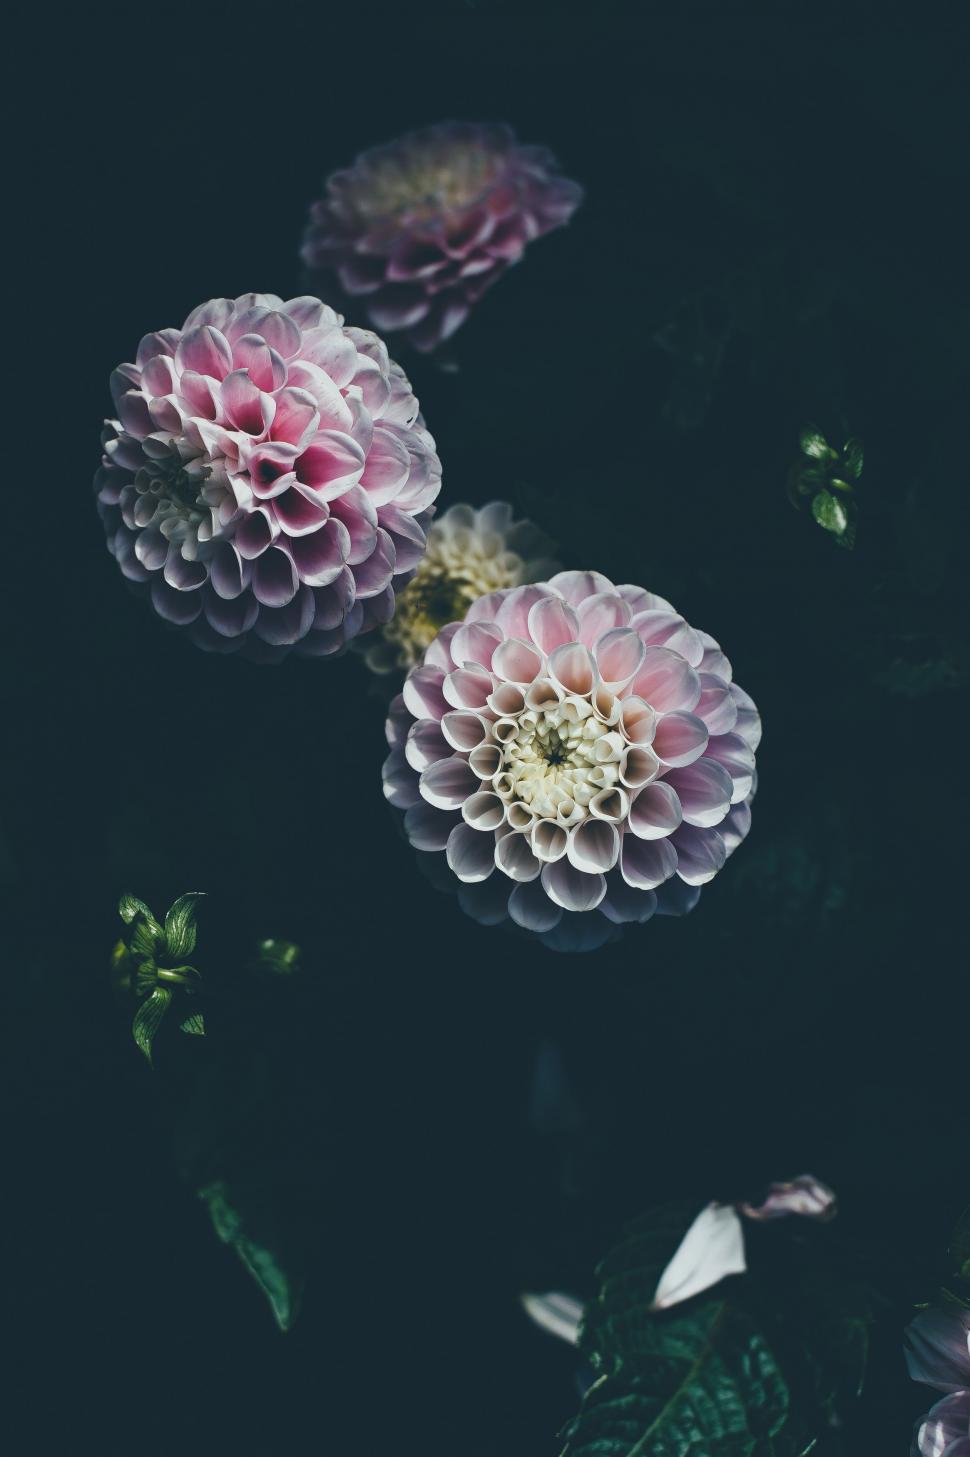 Free Image of Three Pink and White Flowers on Black Background 